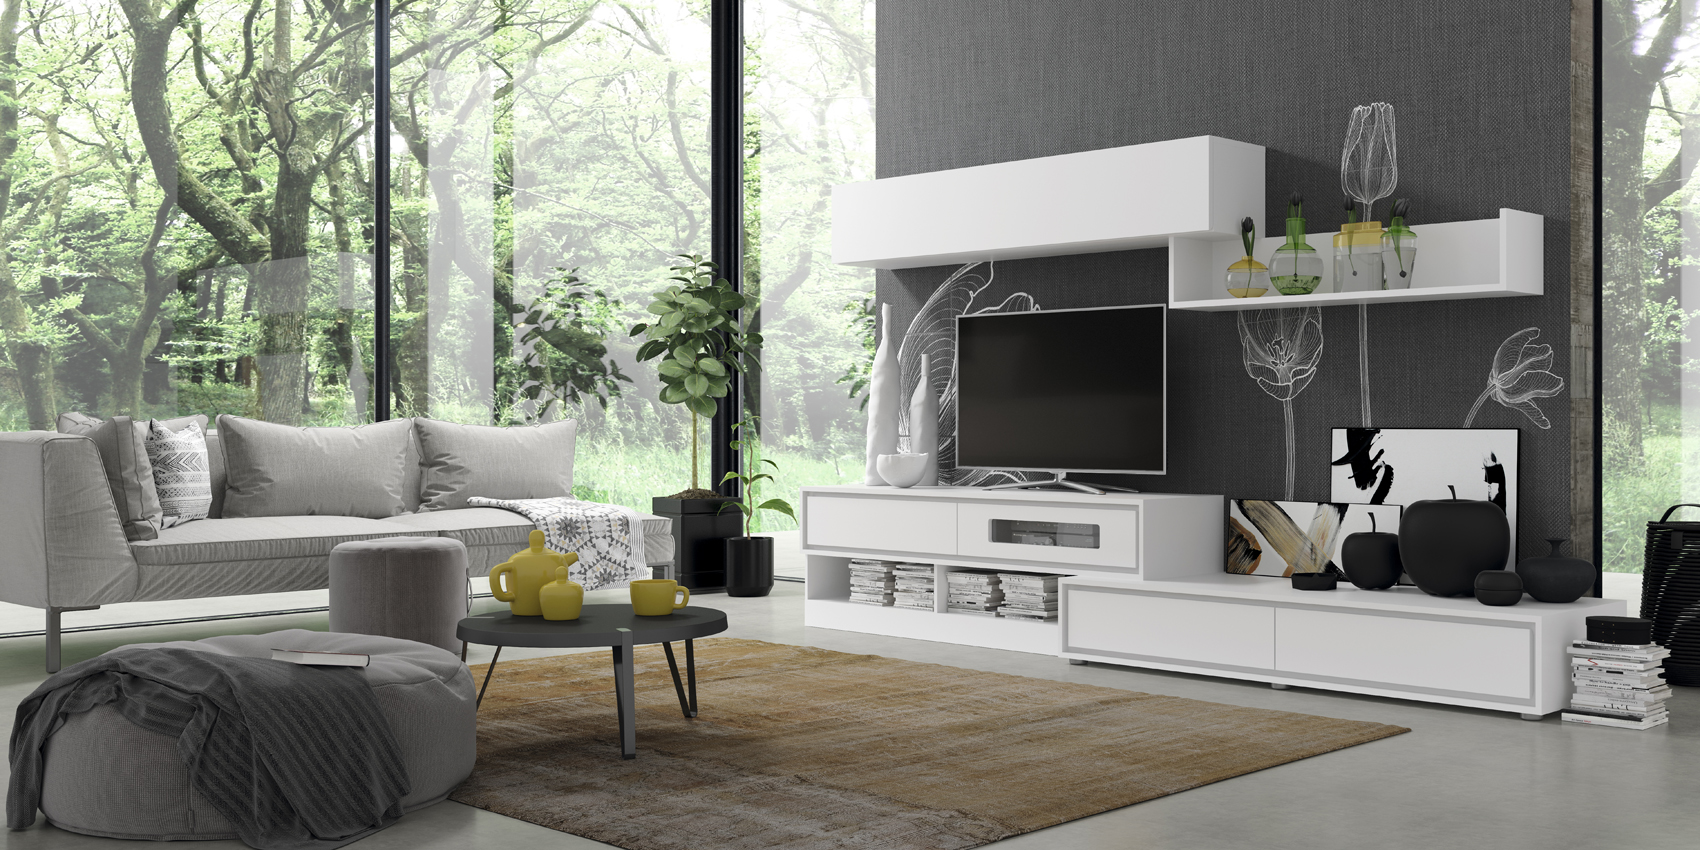 Brands MSC Modern Wall Unit, Italy Composition L8